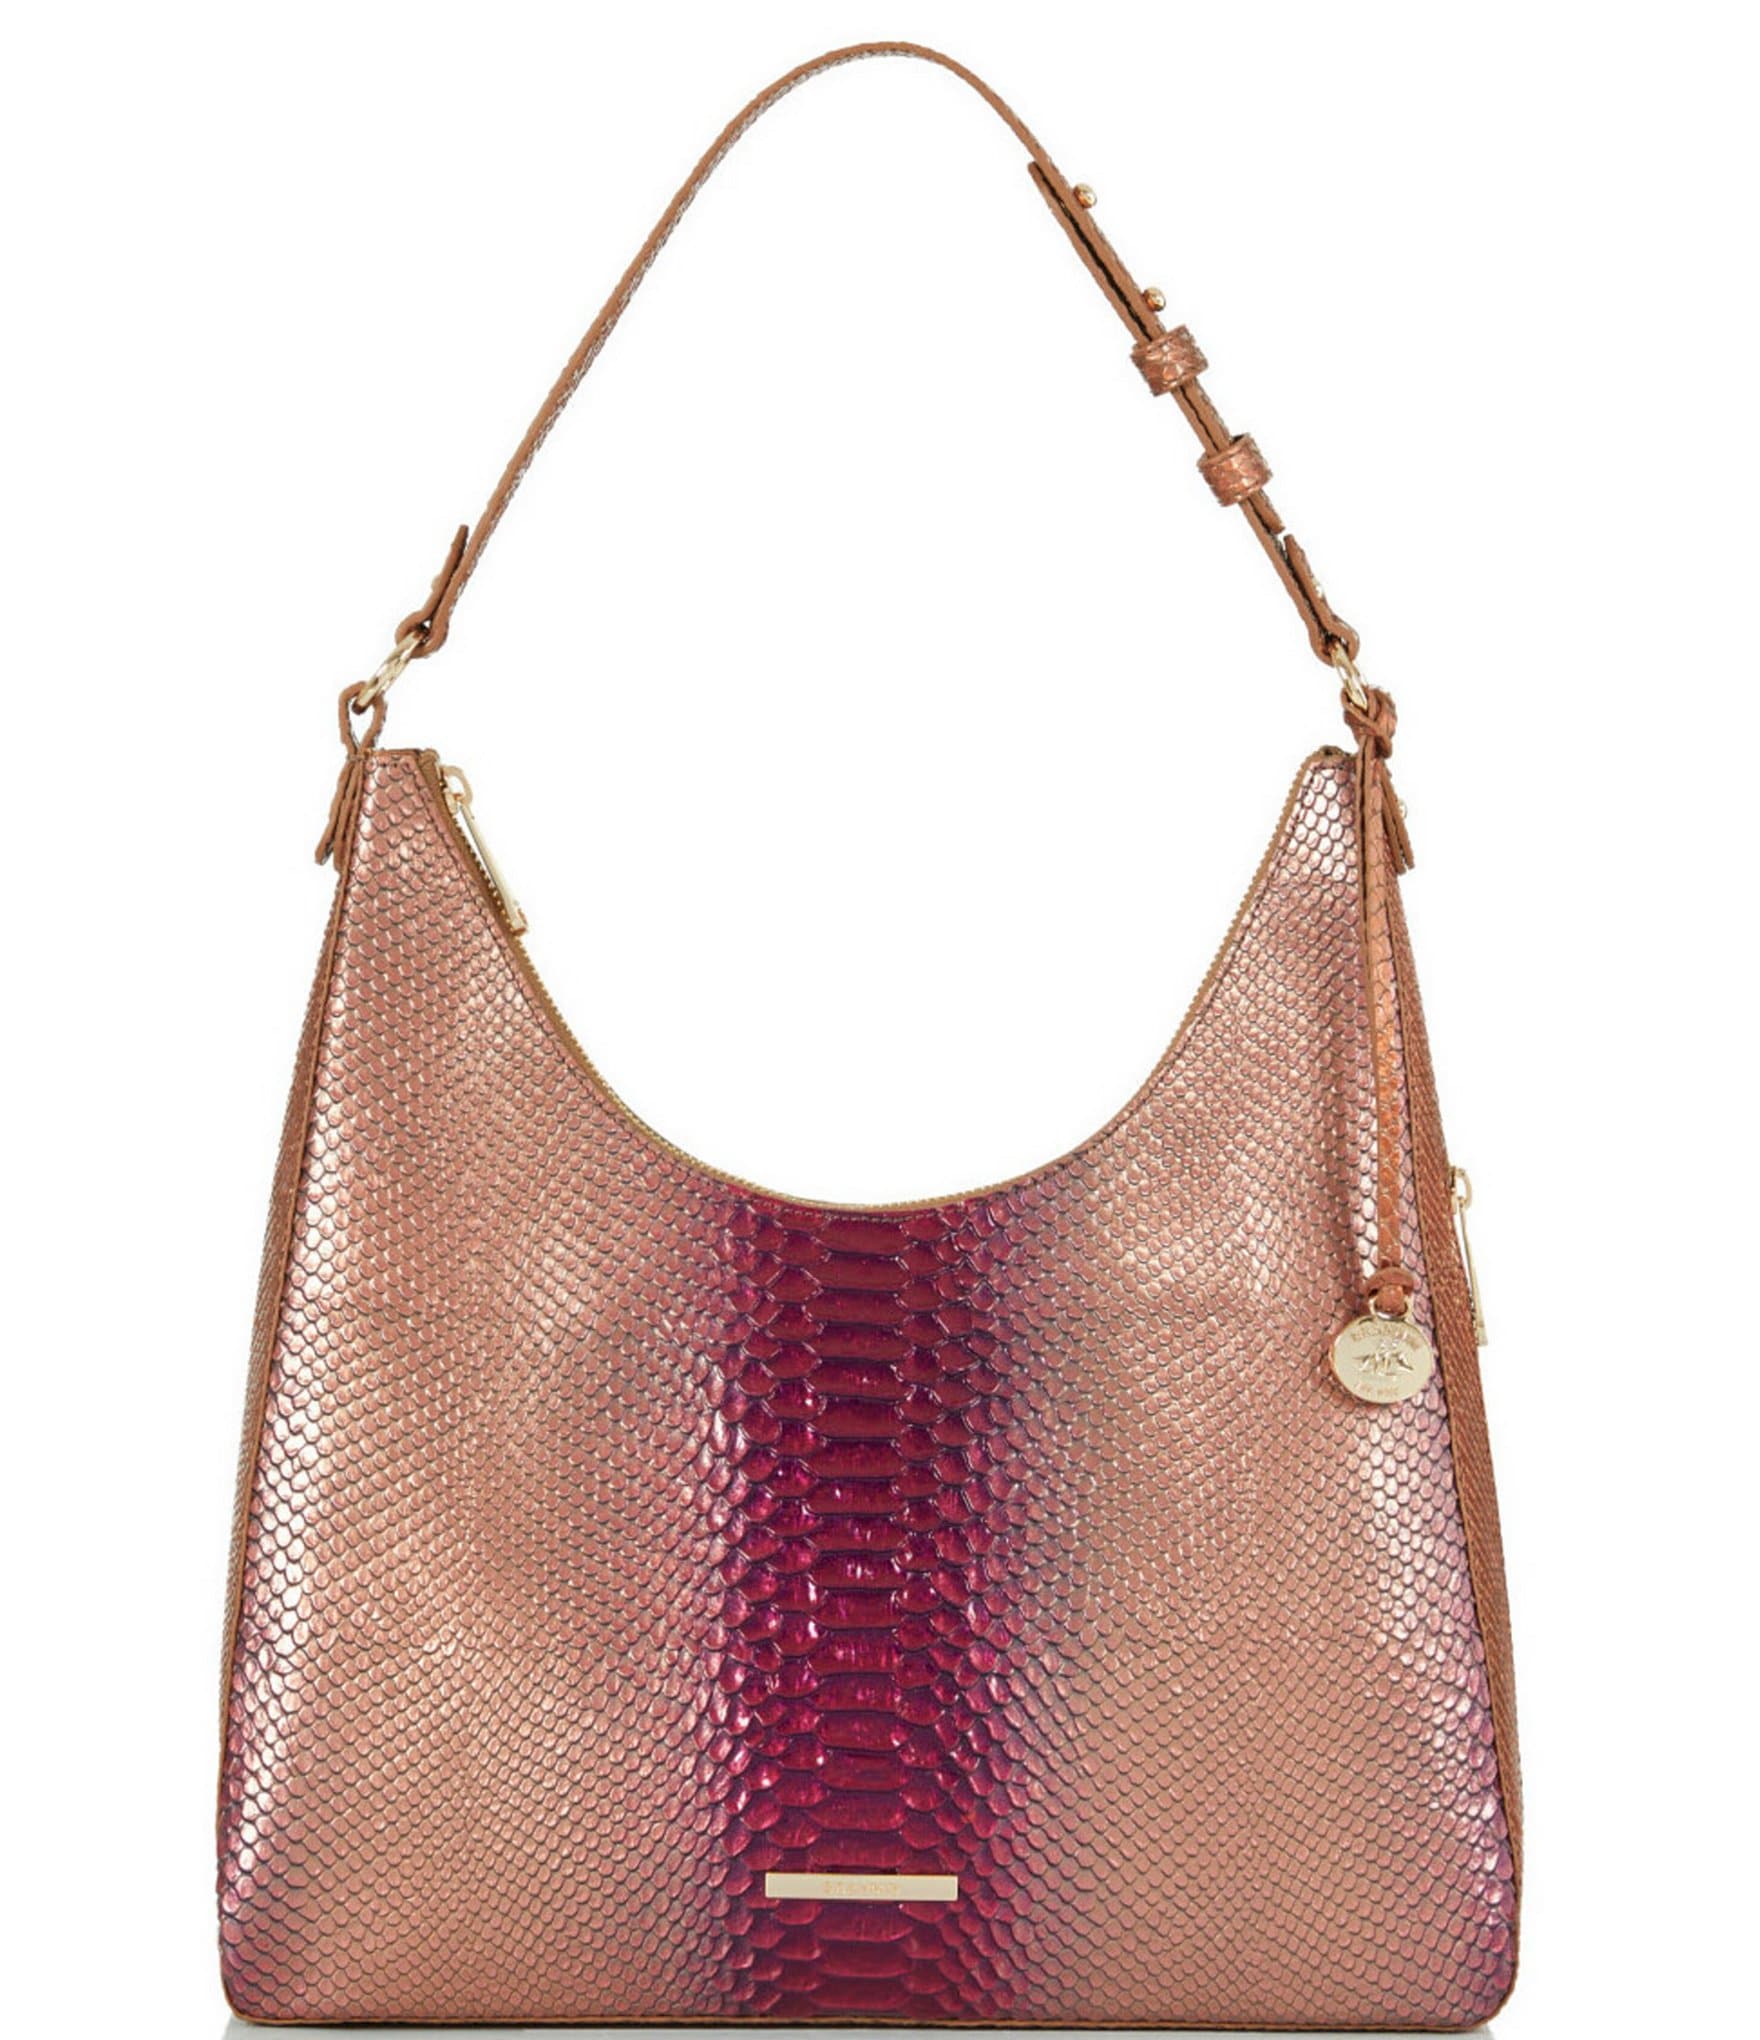 Dillard's - Perfectly pink BRAHMIN bags for you and your bestie